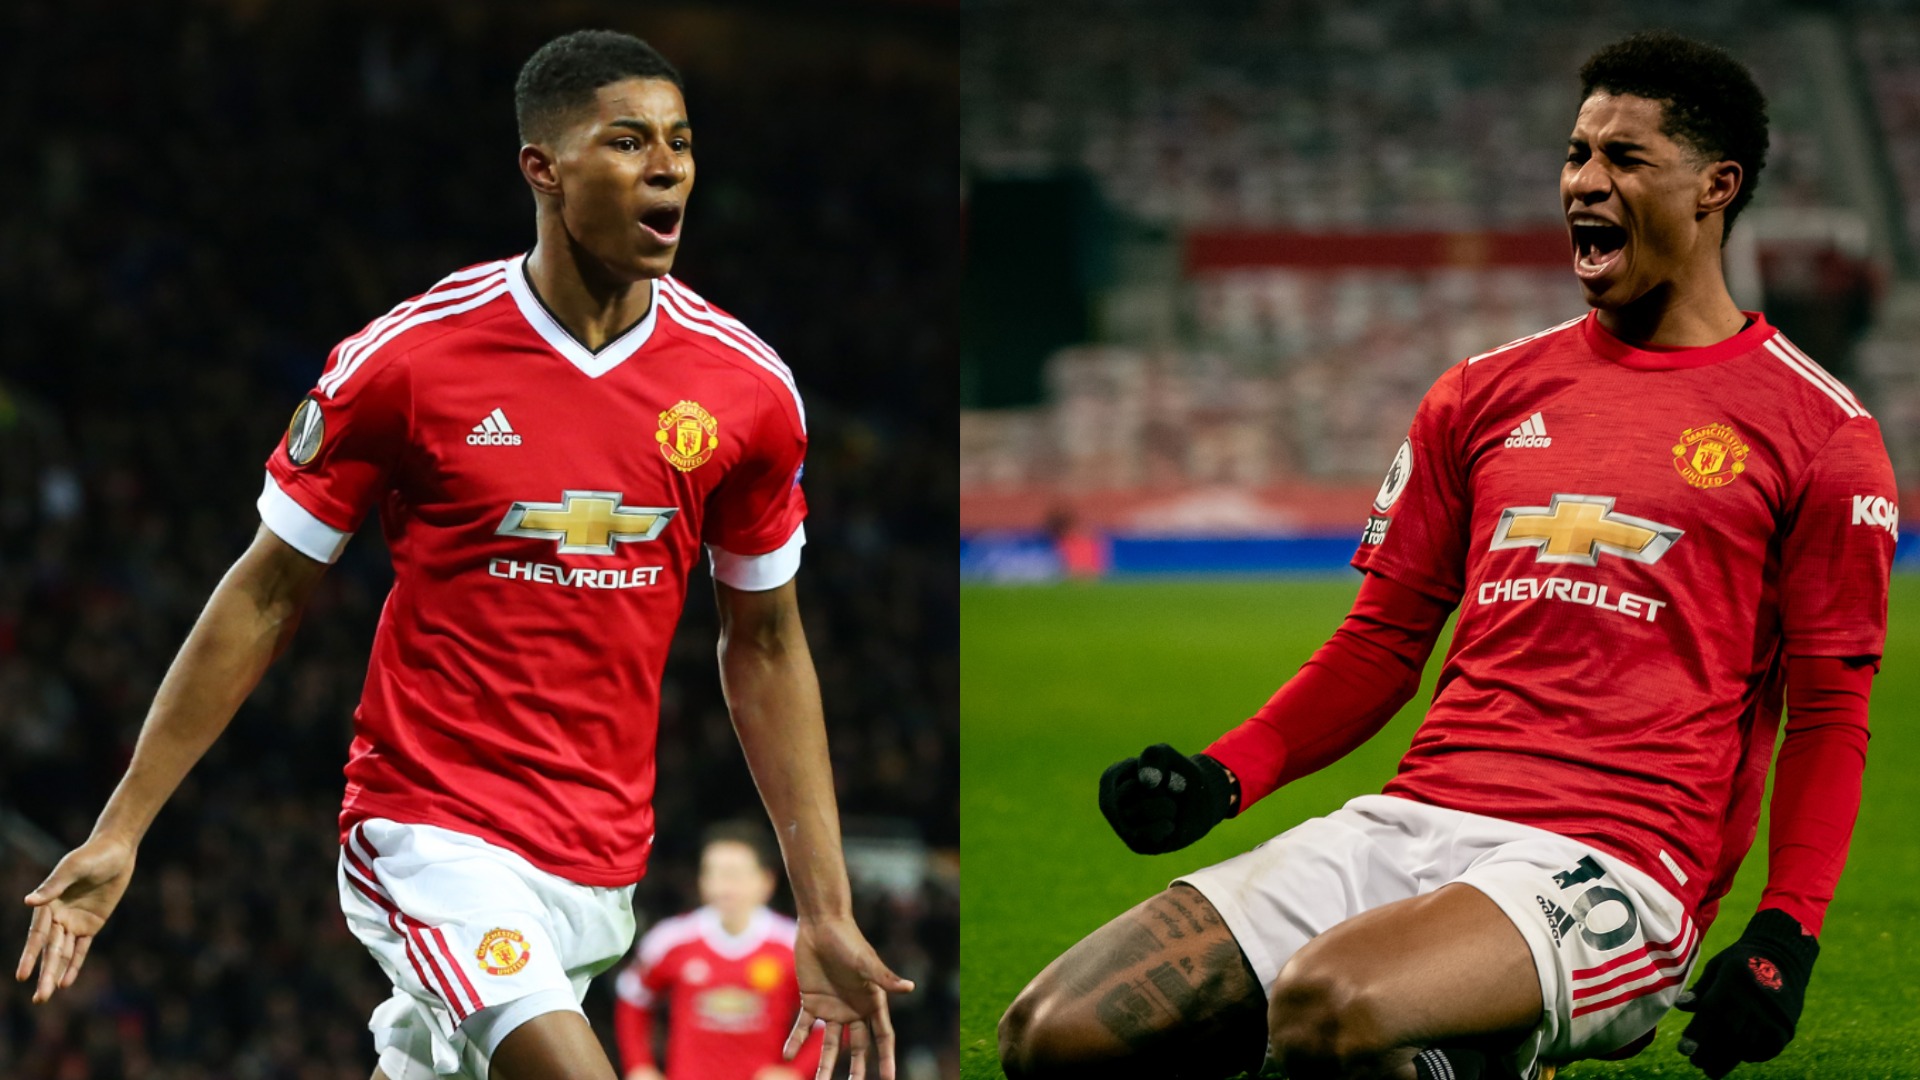 Since his goalscoring debut five years ago, Marcus Rashford has developed into an indispensable part of Manchester United's plans.